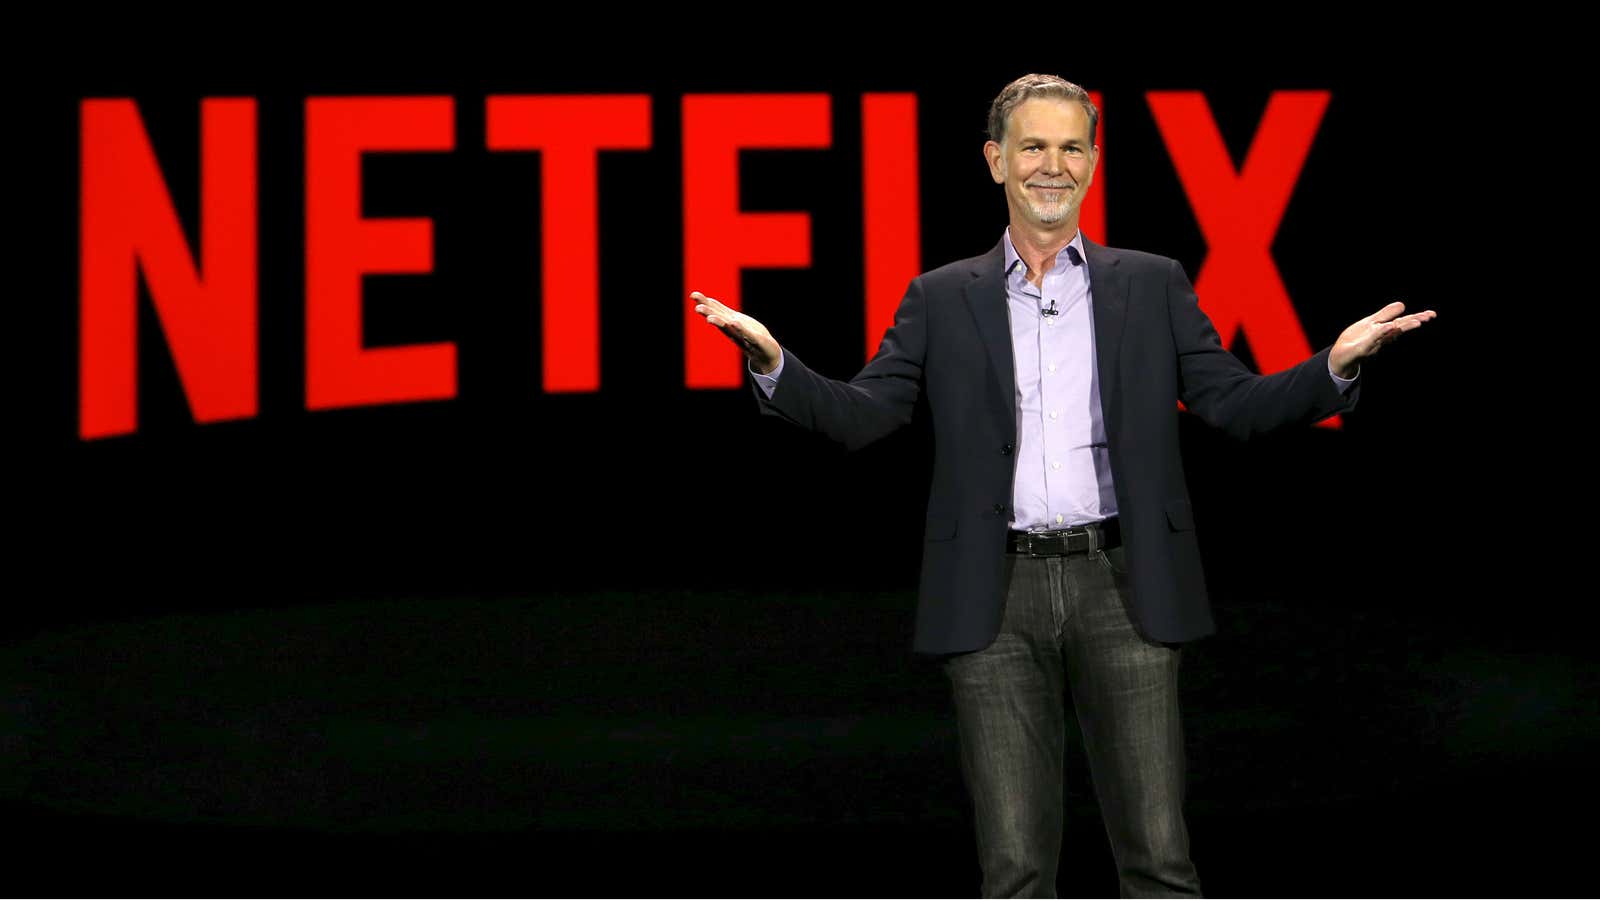 Faster Netflix for Africans.